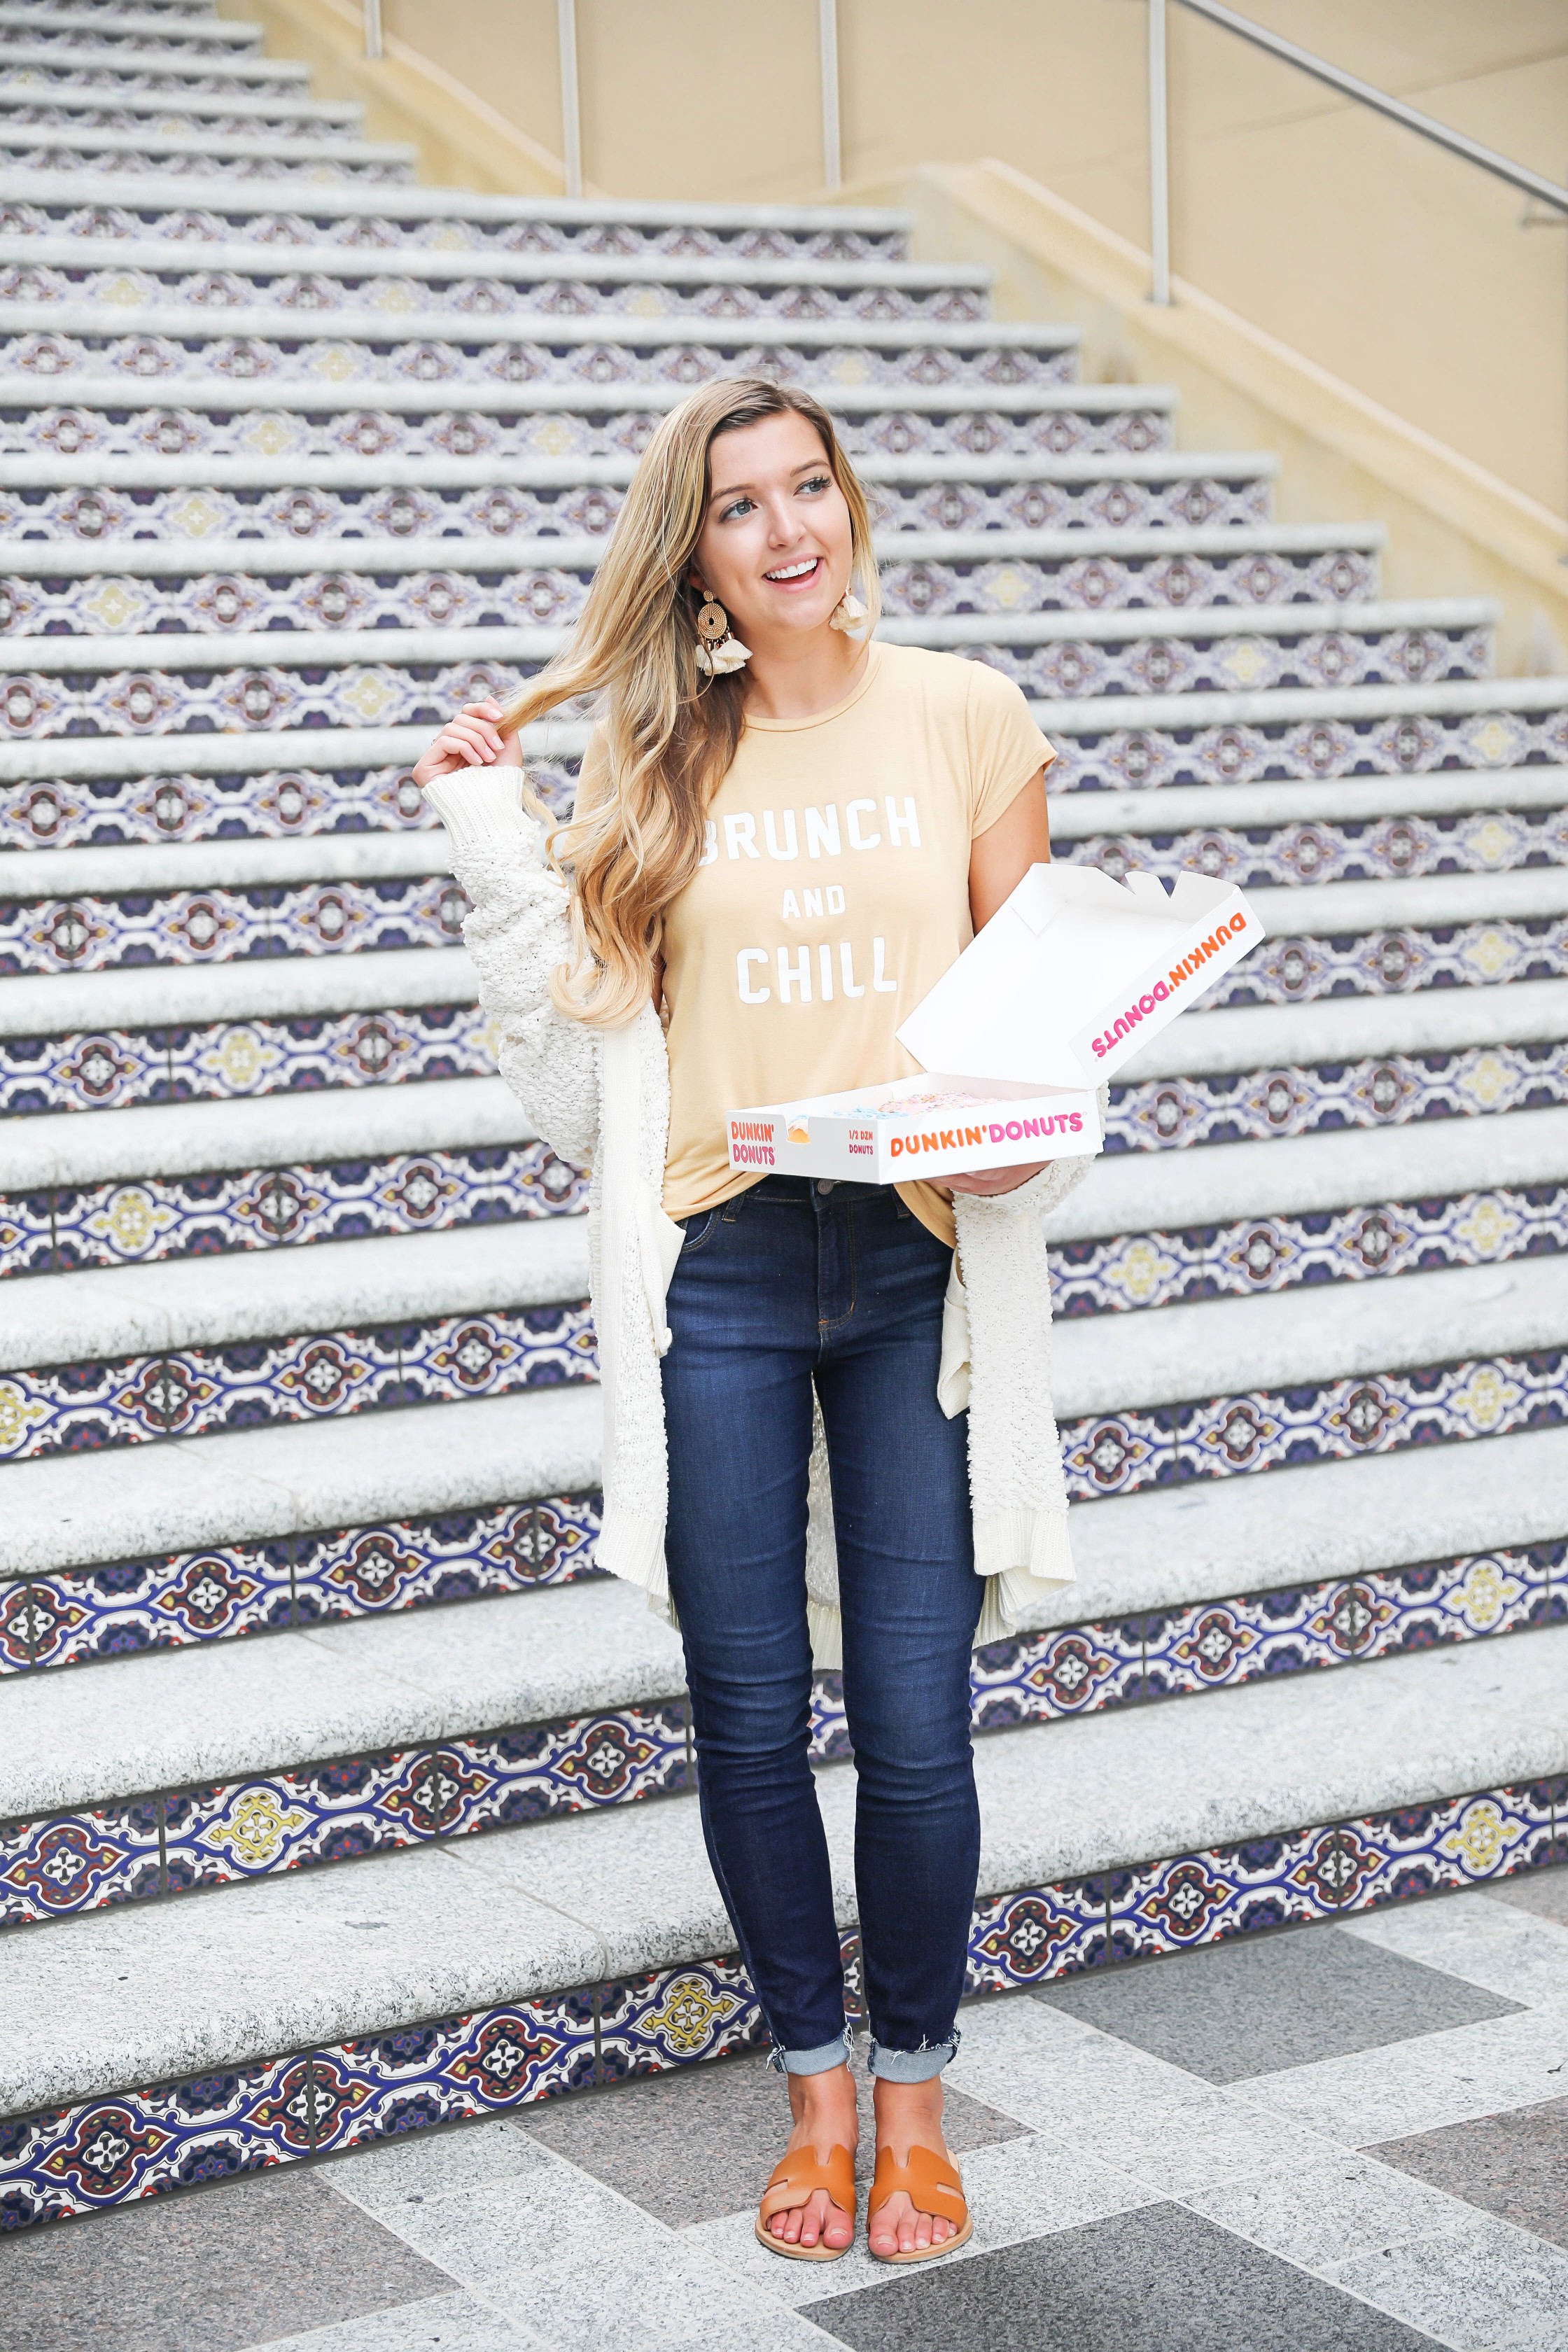 Brunch and chill tee! Super cute mustard yellow brunch tshirt paired with the cutest inexpensive dark blue jeans! Paired the look with my new ivory cardigan from the nordstrom anniversary sale 2018! Details on fashion blog daily dose of charm by lauren lindmark